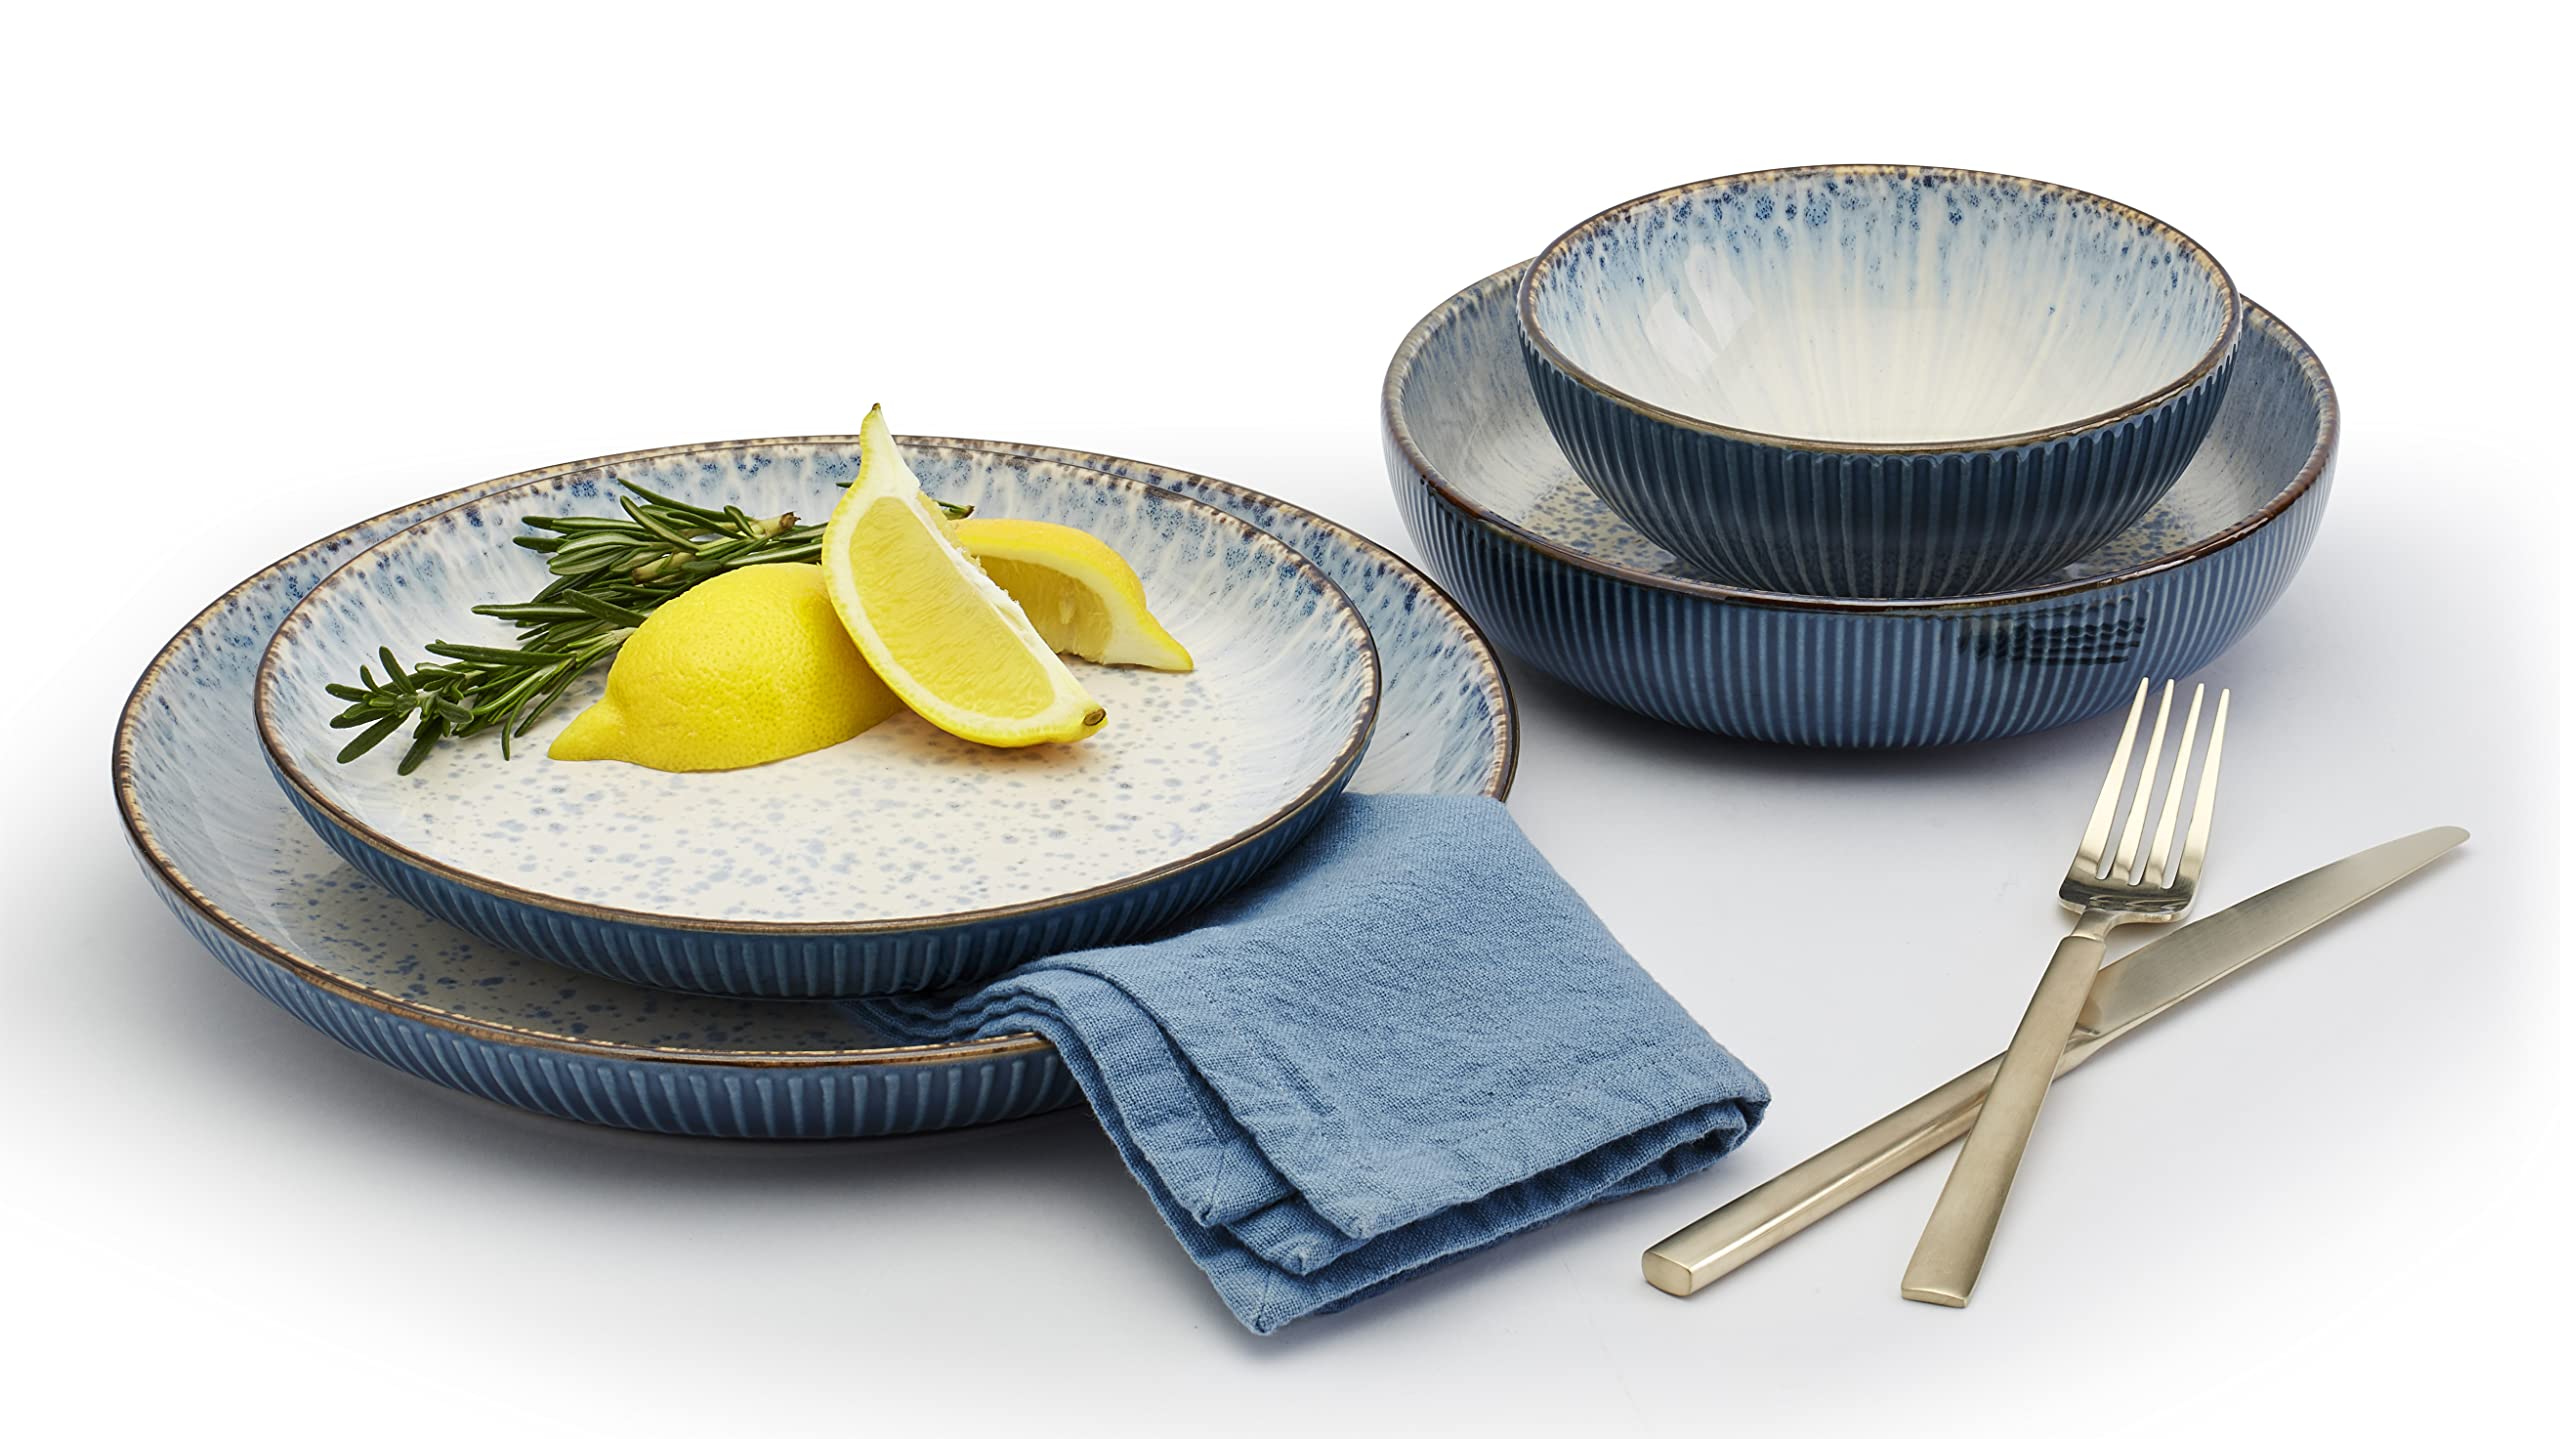 Tabletops Gallery Speckled Farmhouse Collection- Stoneware Dishes Service for 4 Dinner Salad Appetizer Dessert Plate Bowls, 16 Piece Jura Embossed Dinnerware Set in Smoky Blue